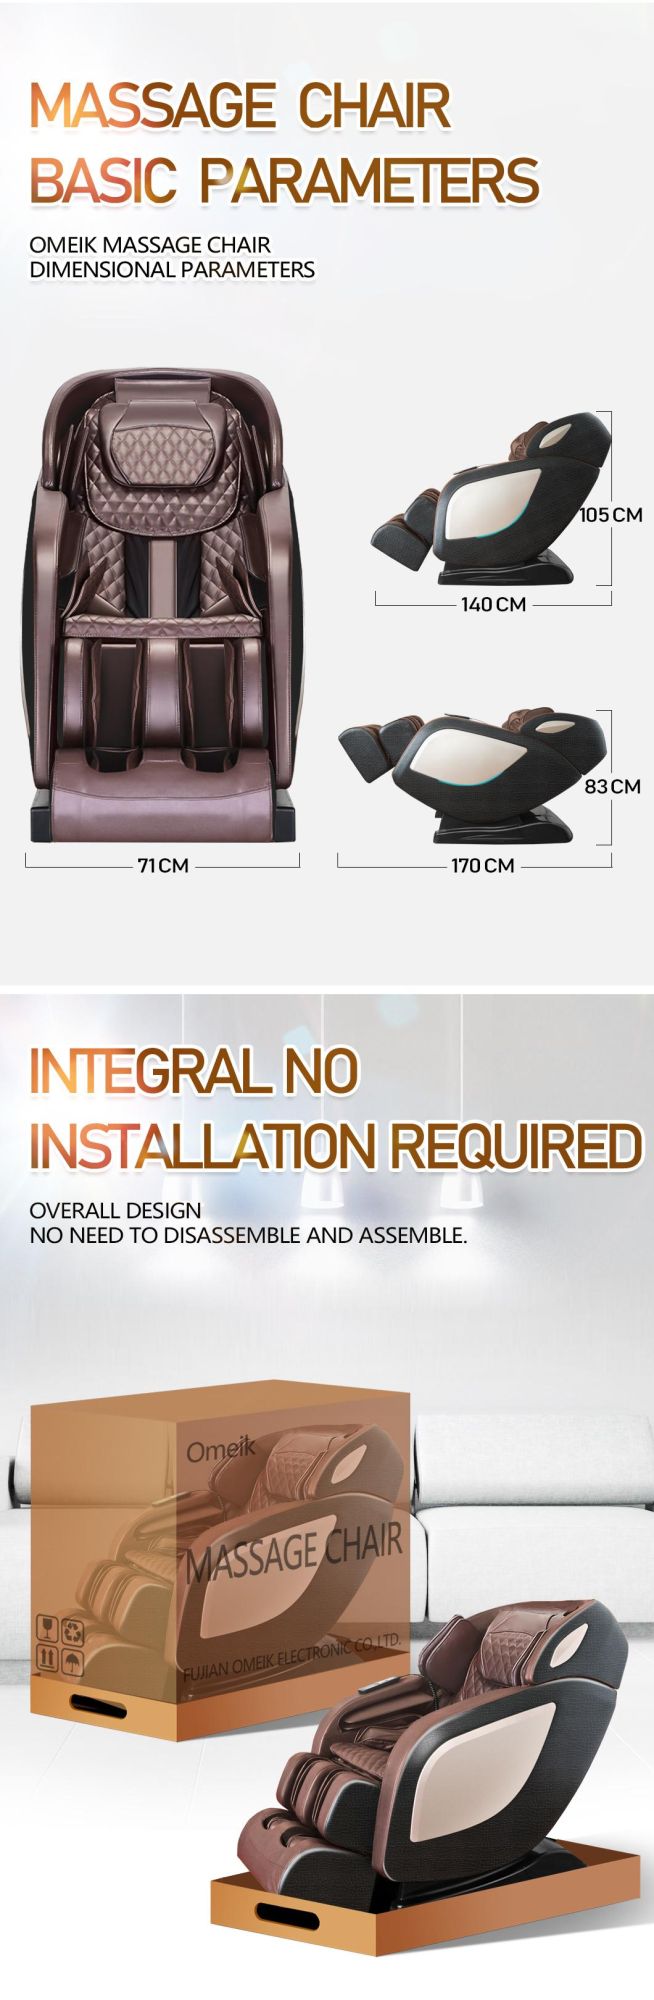 Omeik OEM SL Track Body Scan Heating Therapy Zero Gravity 4D Special Cradle Function Living Room Massage Chair